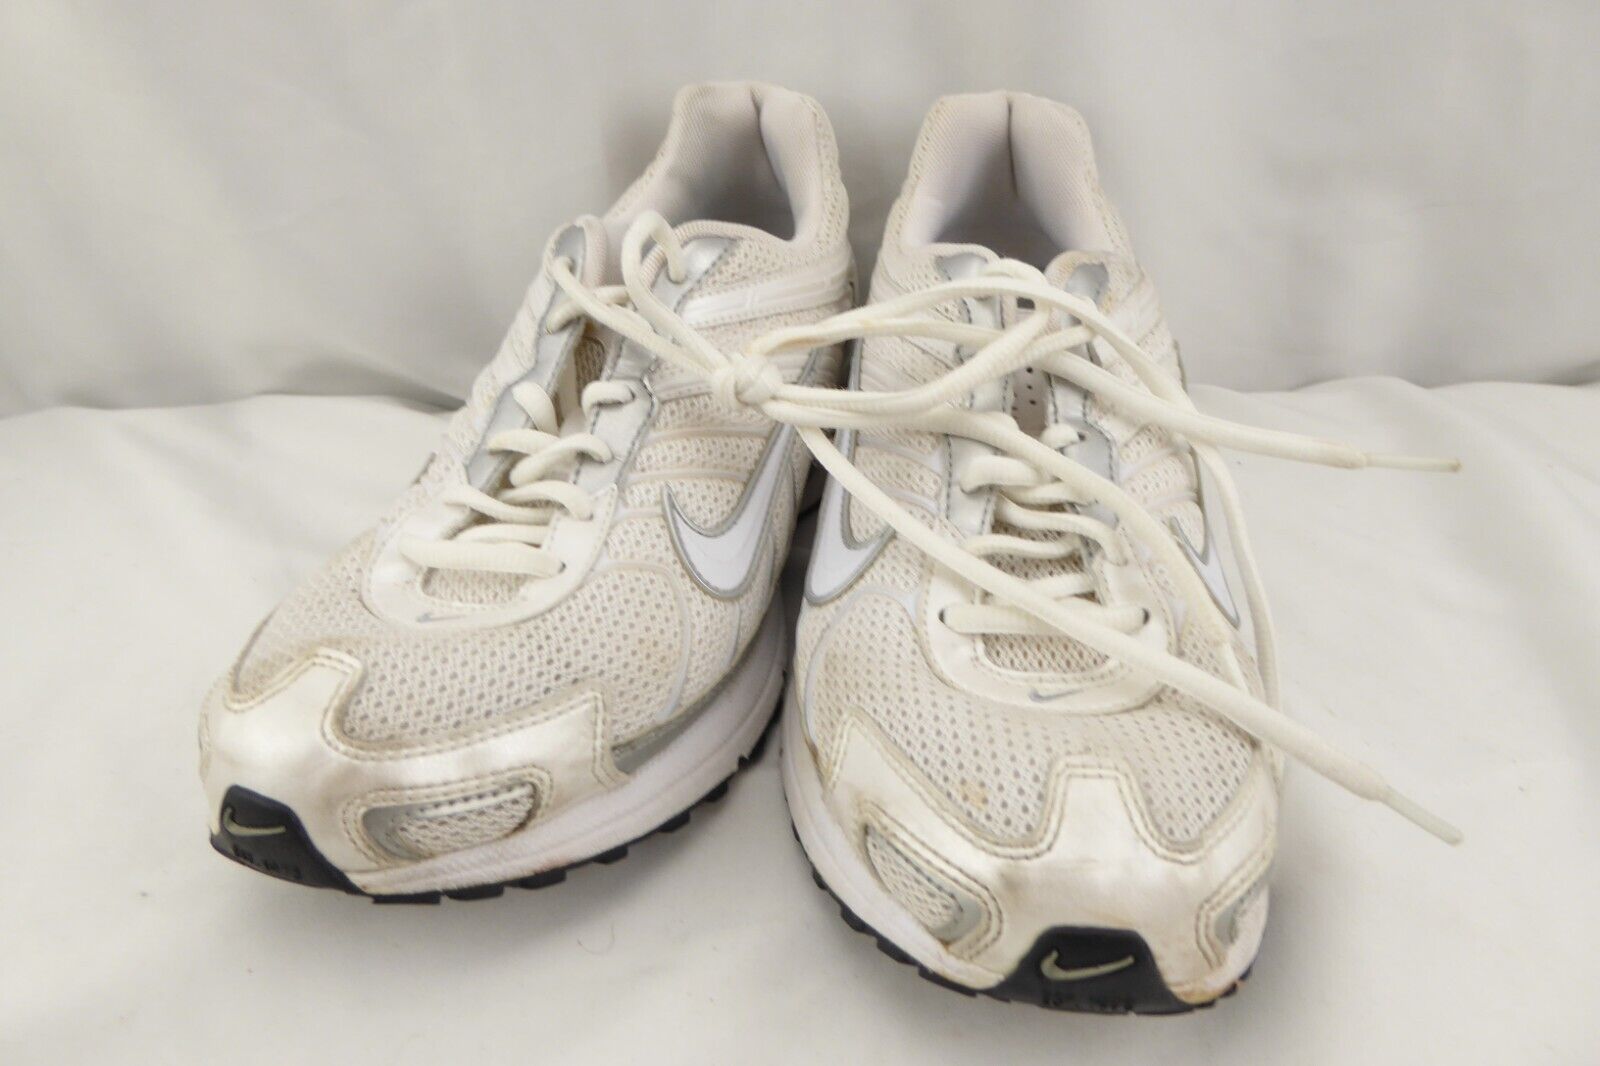 Vernietigen wit medeleerling Nike Air BRS 1000 Running Shoes Silver on White Size 8.5 Mens Preowned |  eBay